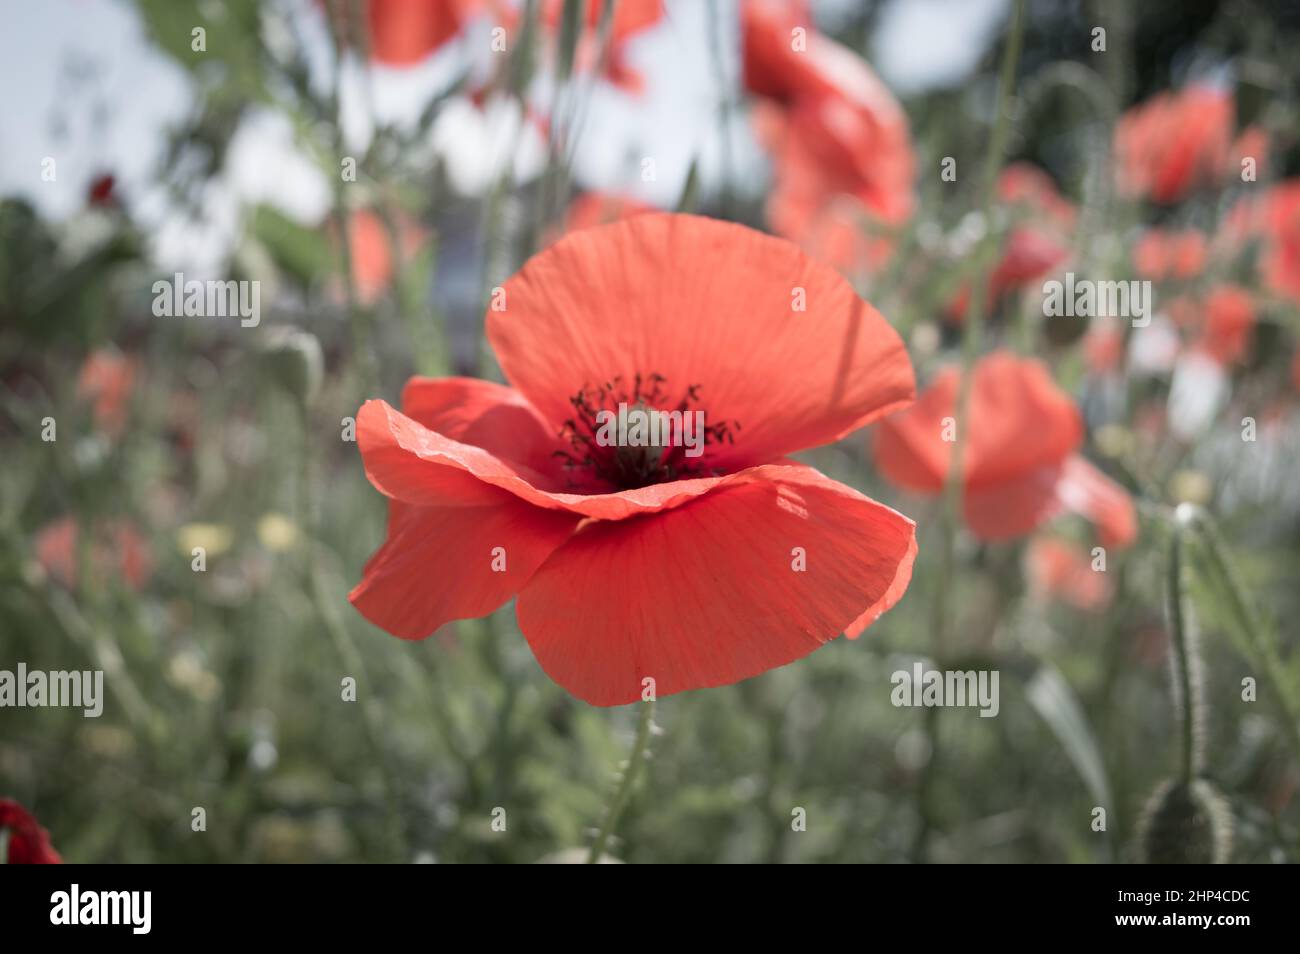 Beautiful red common poppy flowers, Papaver rhoeas, in the field, artistic floral wallpaper Stock Photo